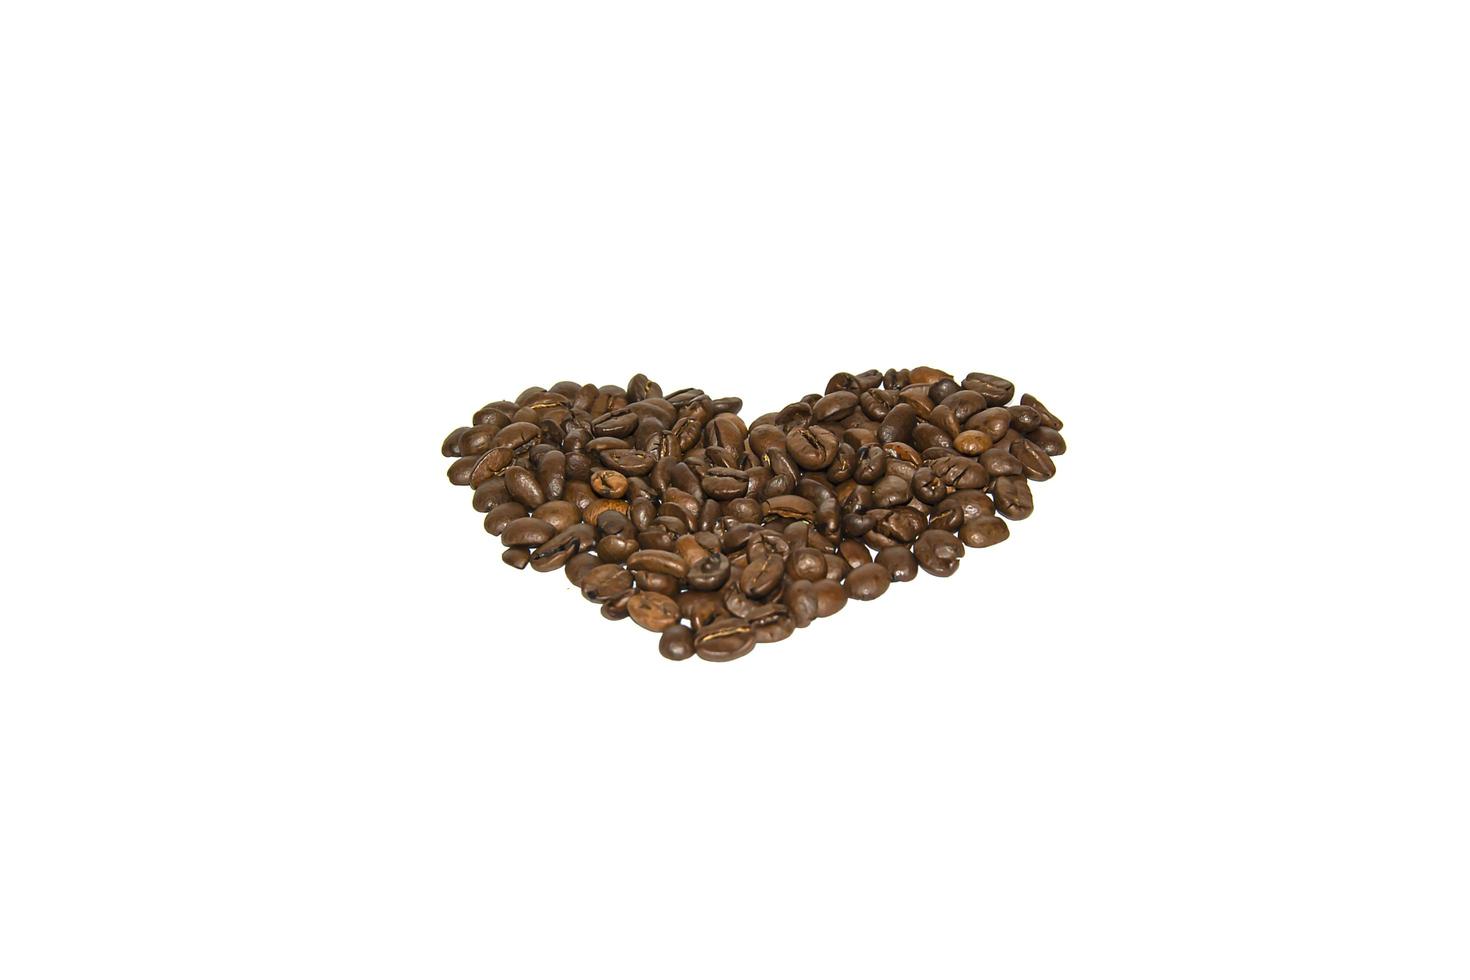 Coffee beans laid out in the shape of a heart on a white background. Isolate. Lifestyle photo